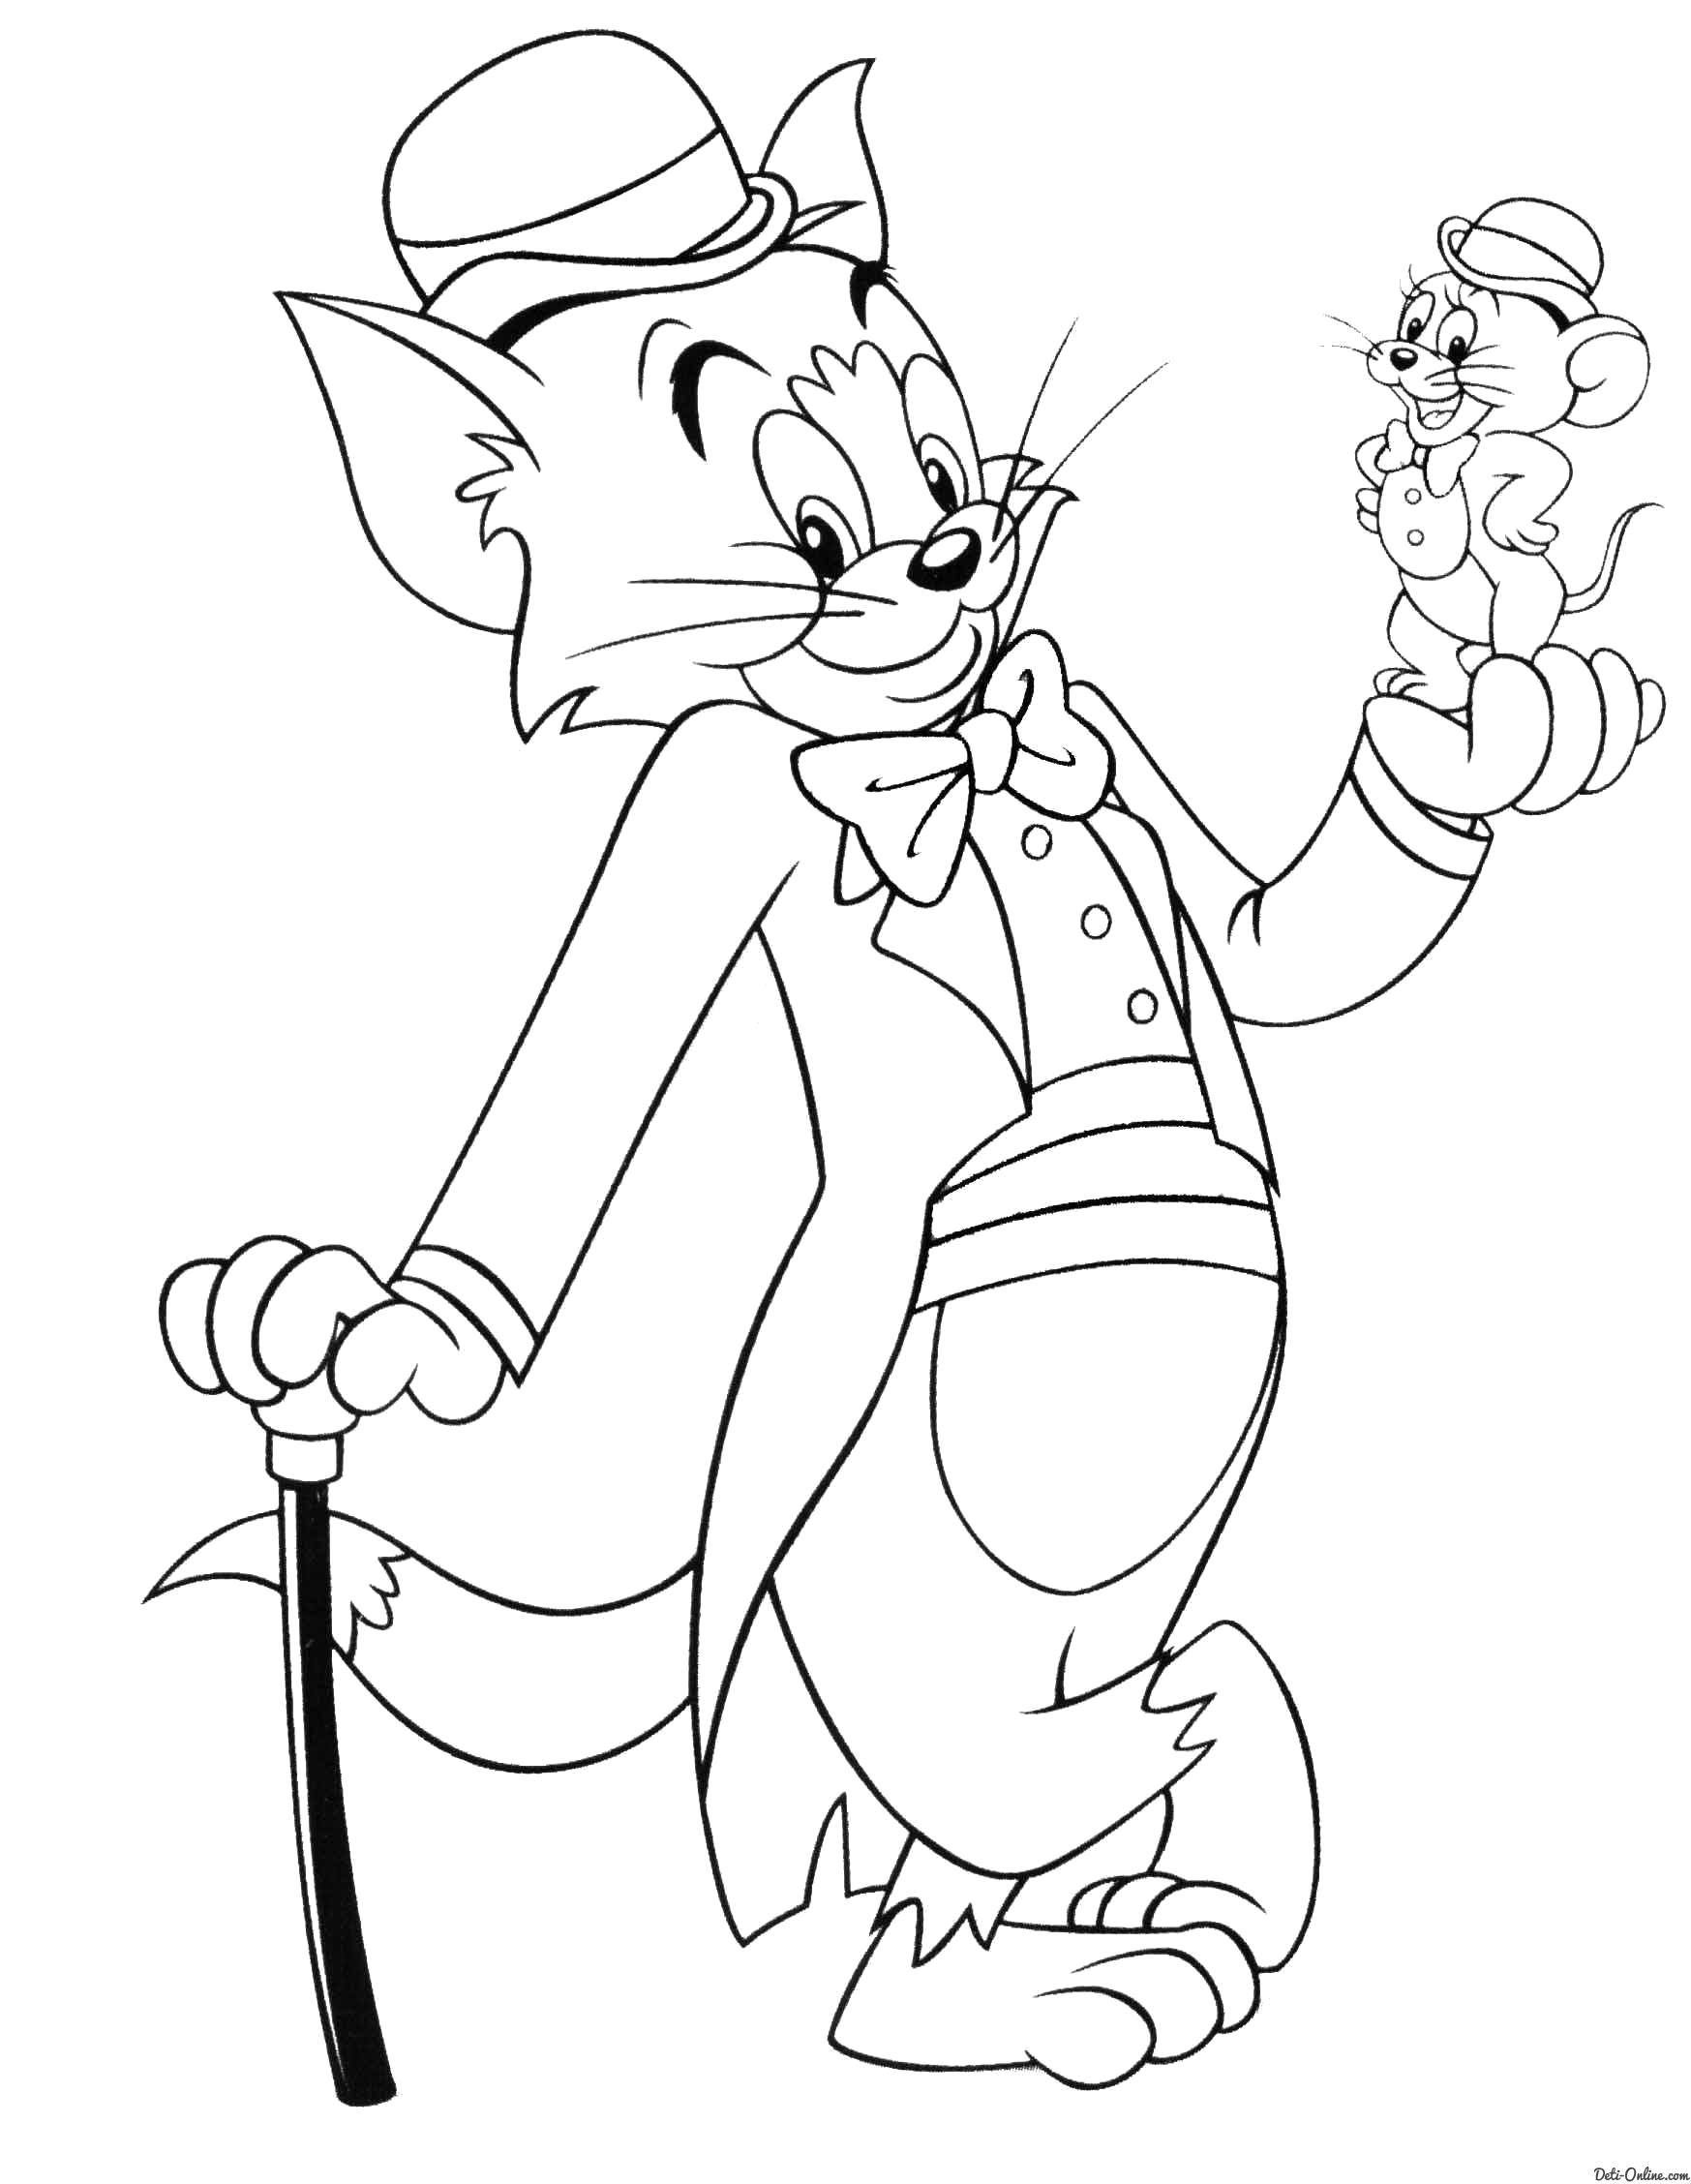 Coloring Tom and Jerry. Category Tom and Jerry. Tags:  Character cartoon, Tom and Jerry.